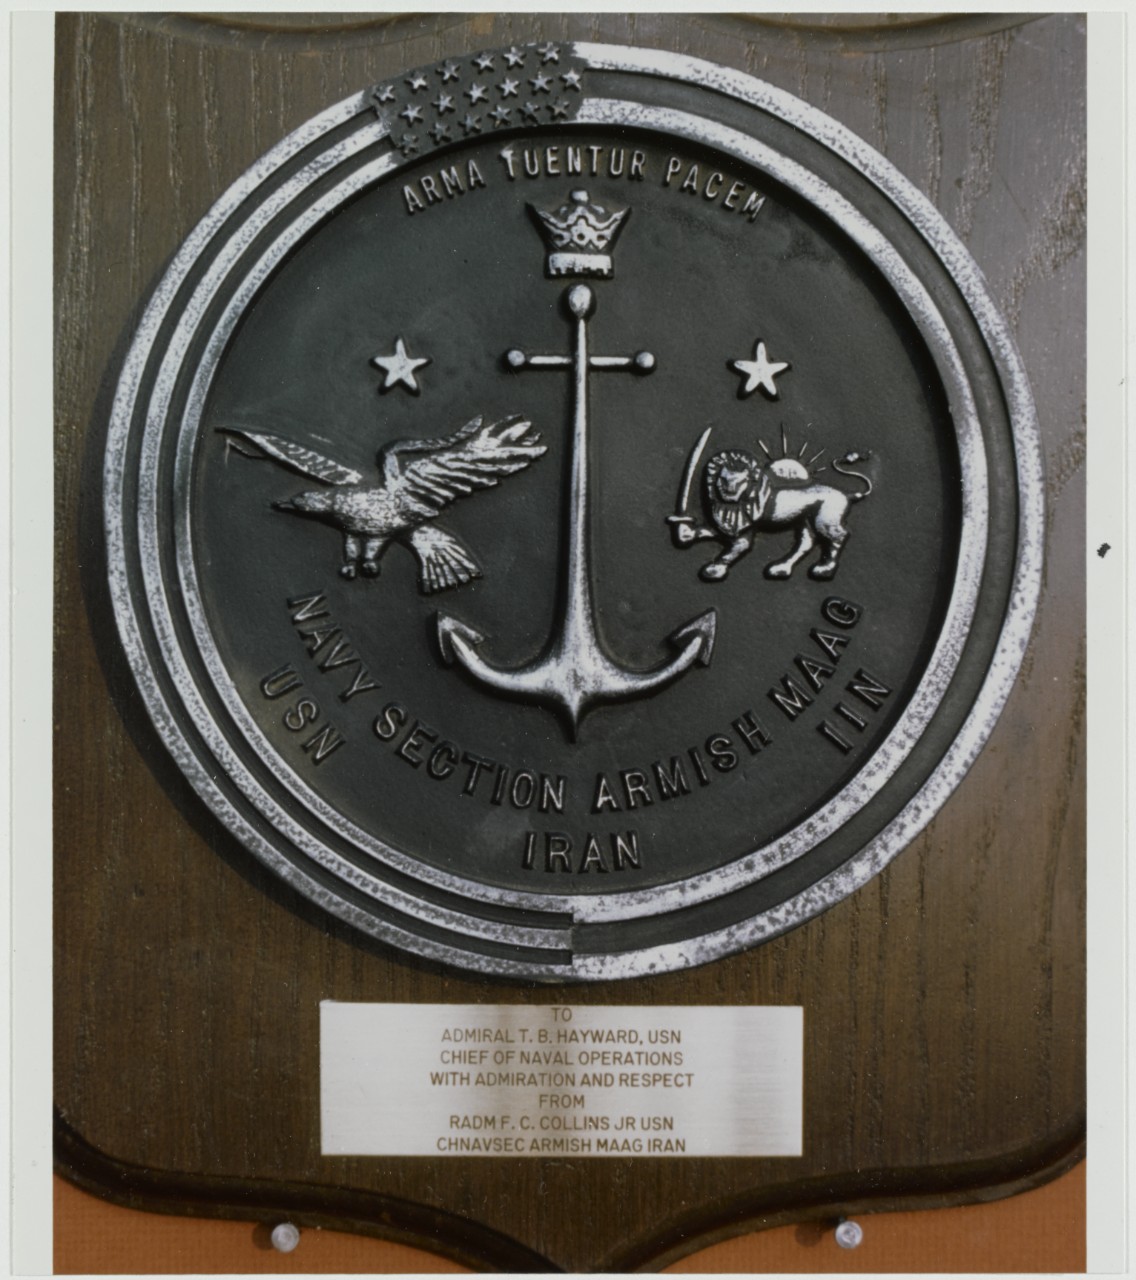 Insignia: Navy Section Armish Maag Iran Plaque presented to Admiral Thomas B. Hayward by Rear Admiral F.C. Collins Jr.